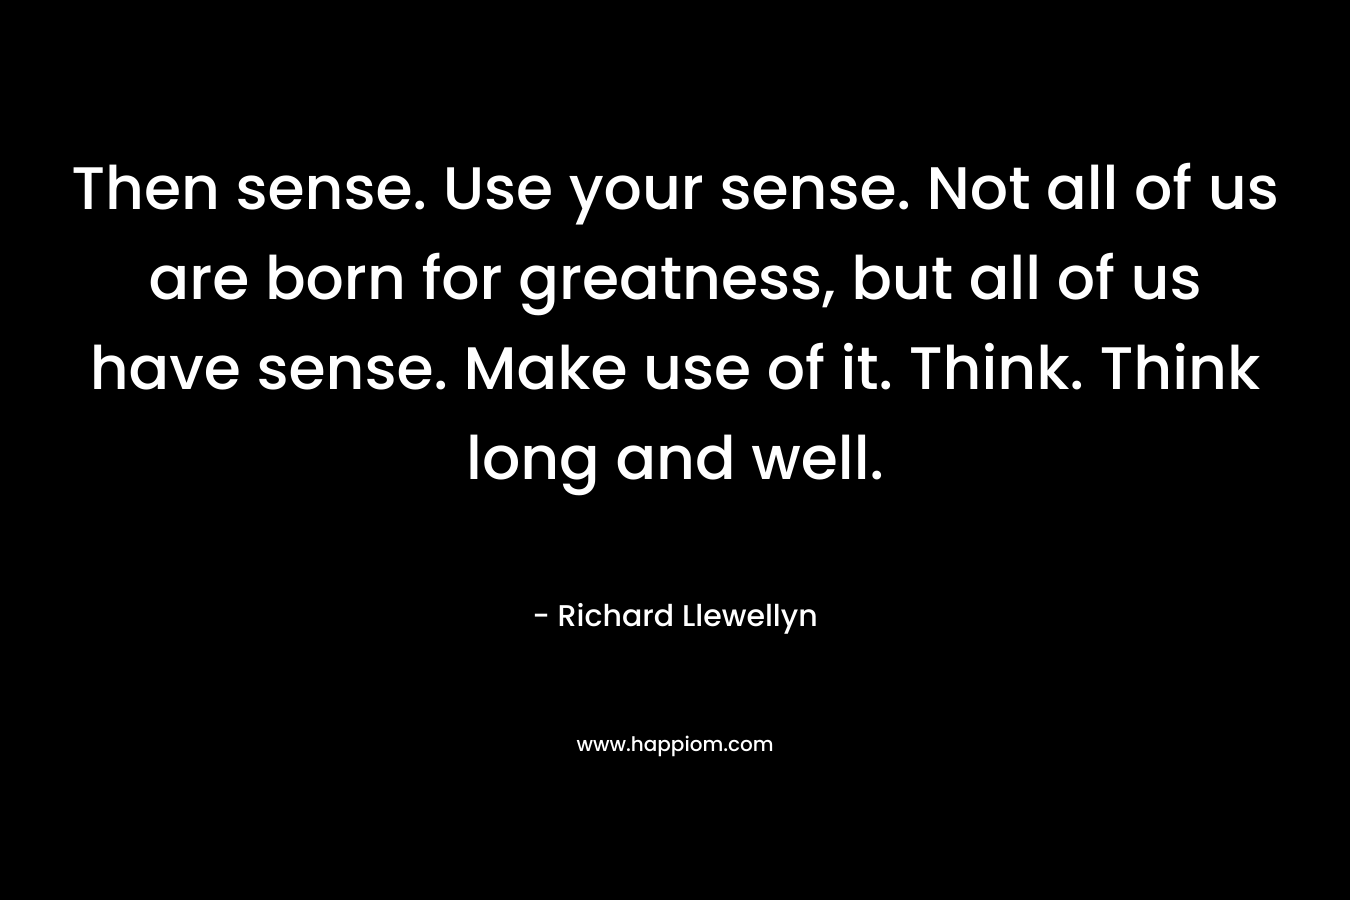 Then sense. Use your sense. Not all of us are born for greatness, but all of us have sense. Make use of it. Think. Think long and well.